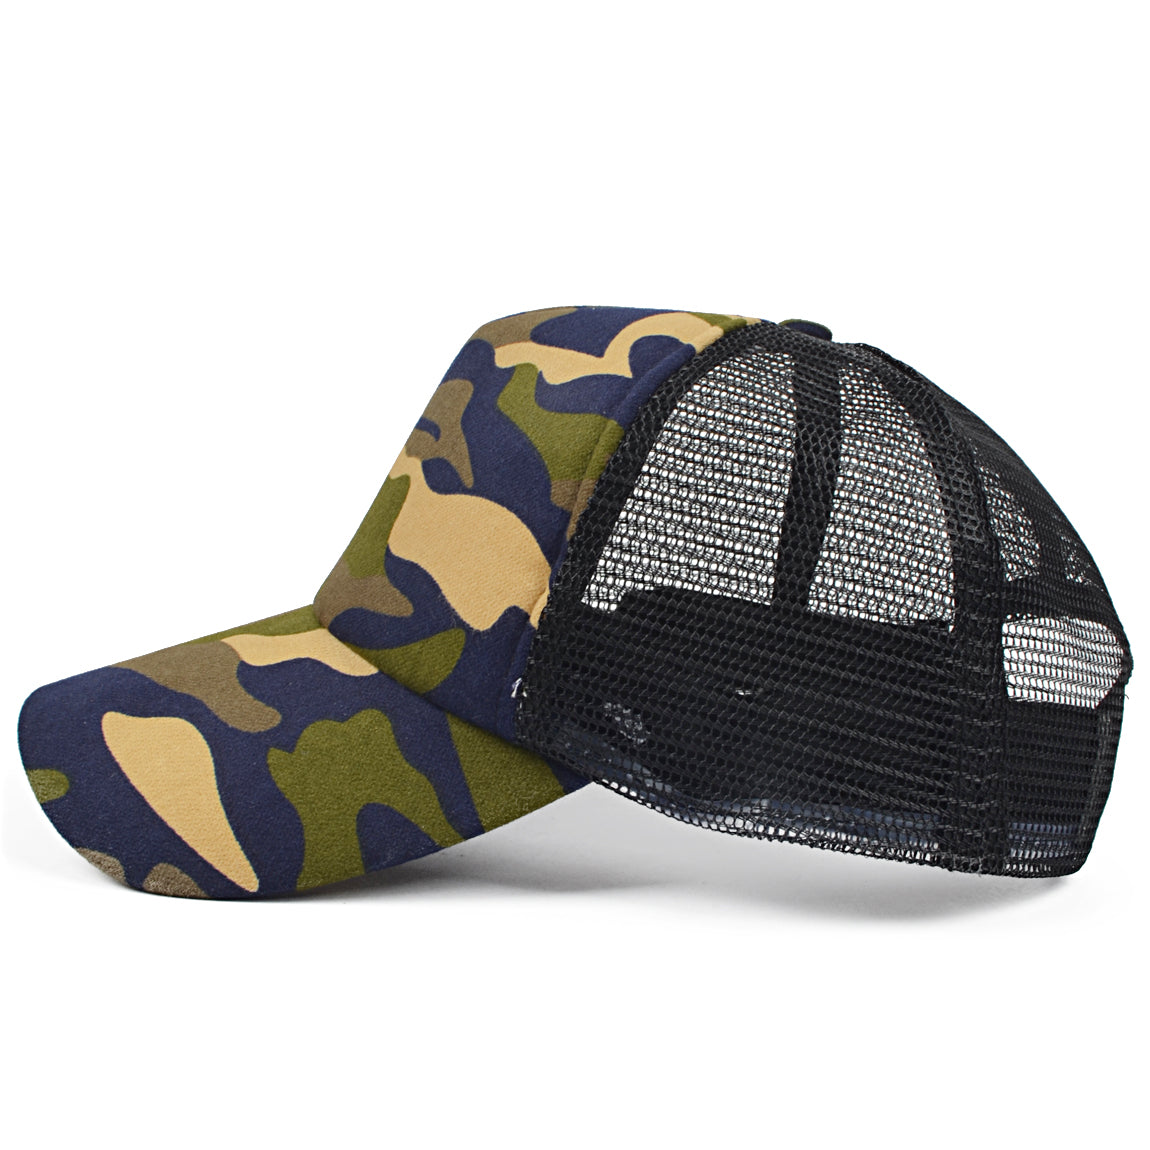 Unisex Classic Camo Curved Bill Snapback Mesh Trucker Hat A121 - forbusitehats